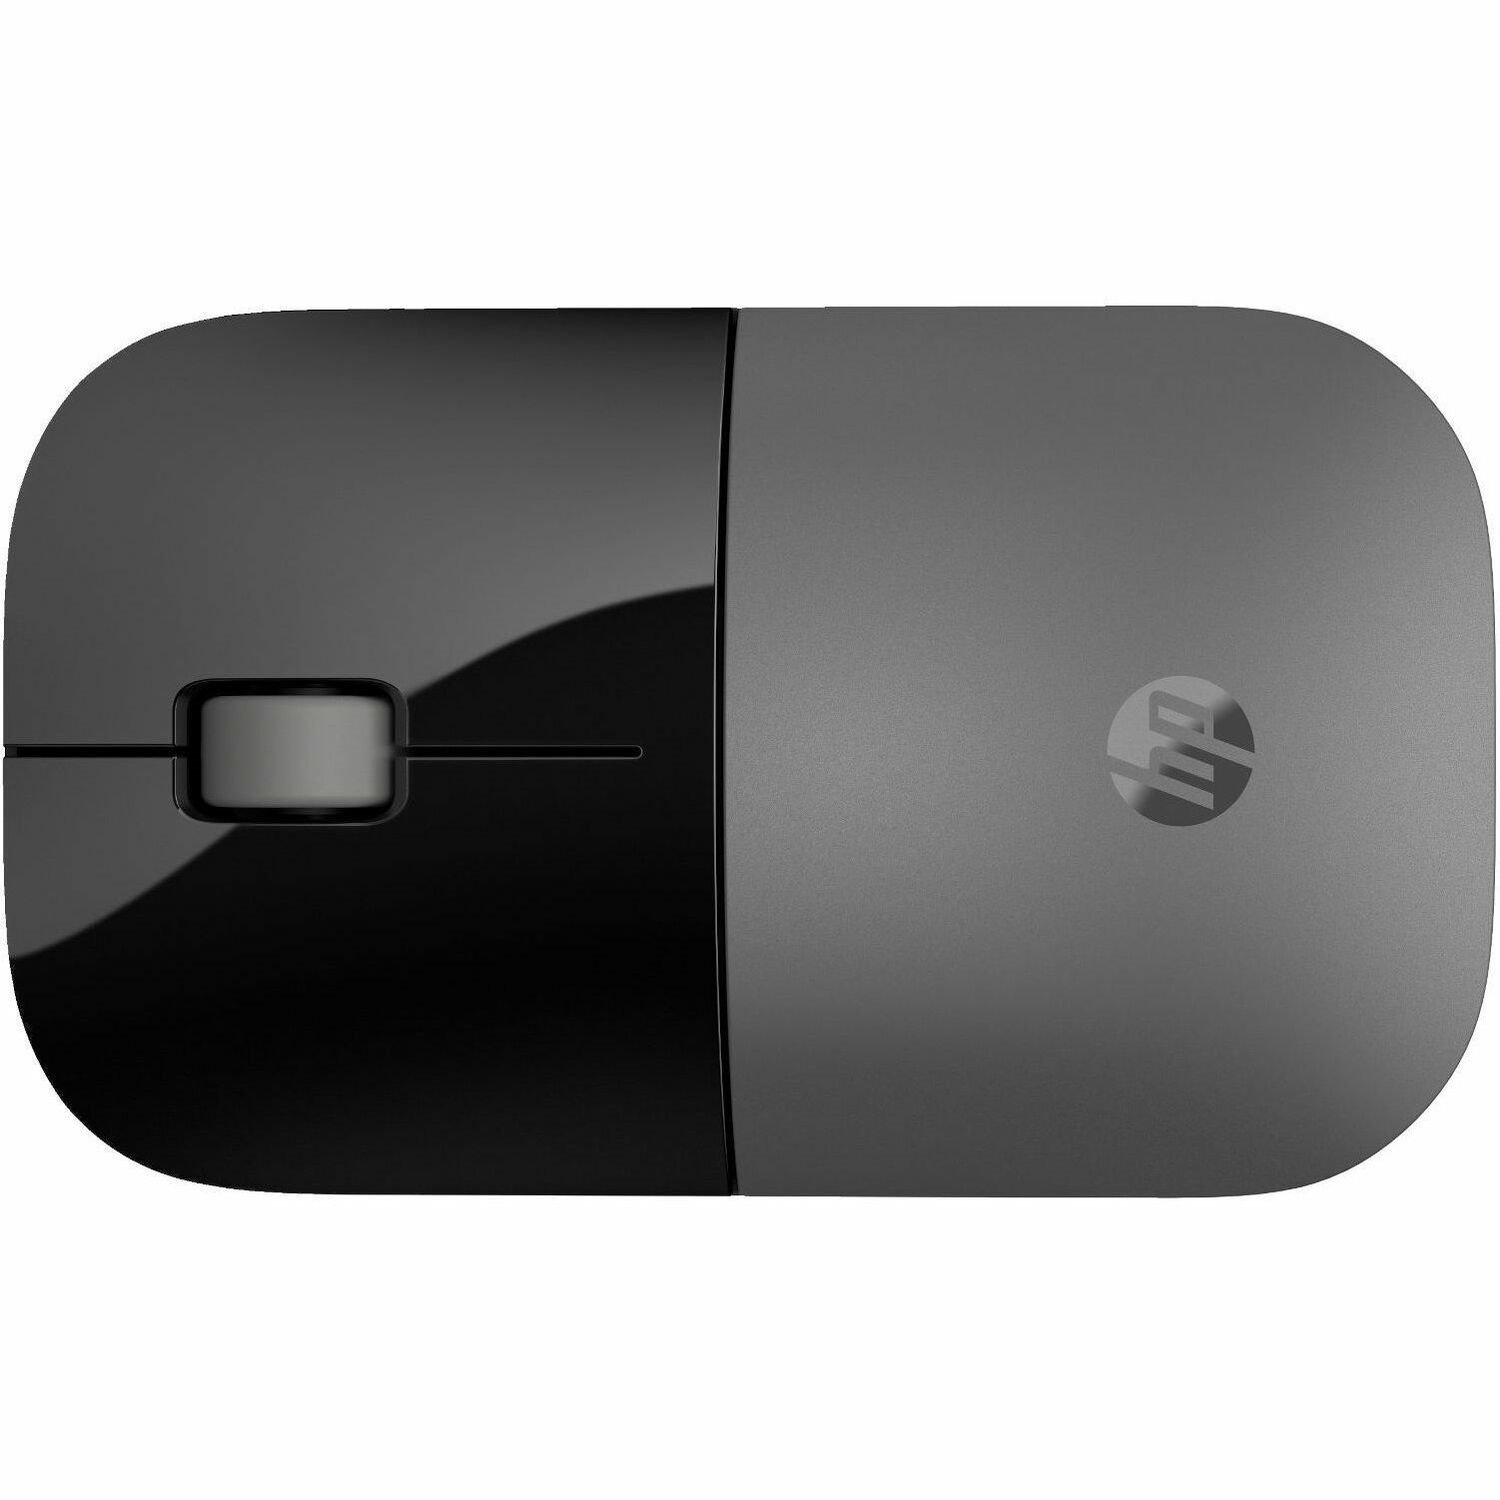 HP Z3700 Mouse - Bluetooth - USB Type A - Blue LED - 3 Button(s) - Silver